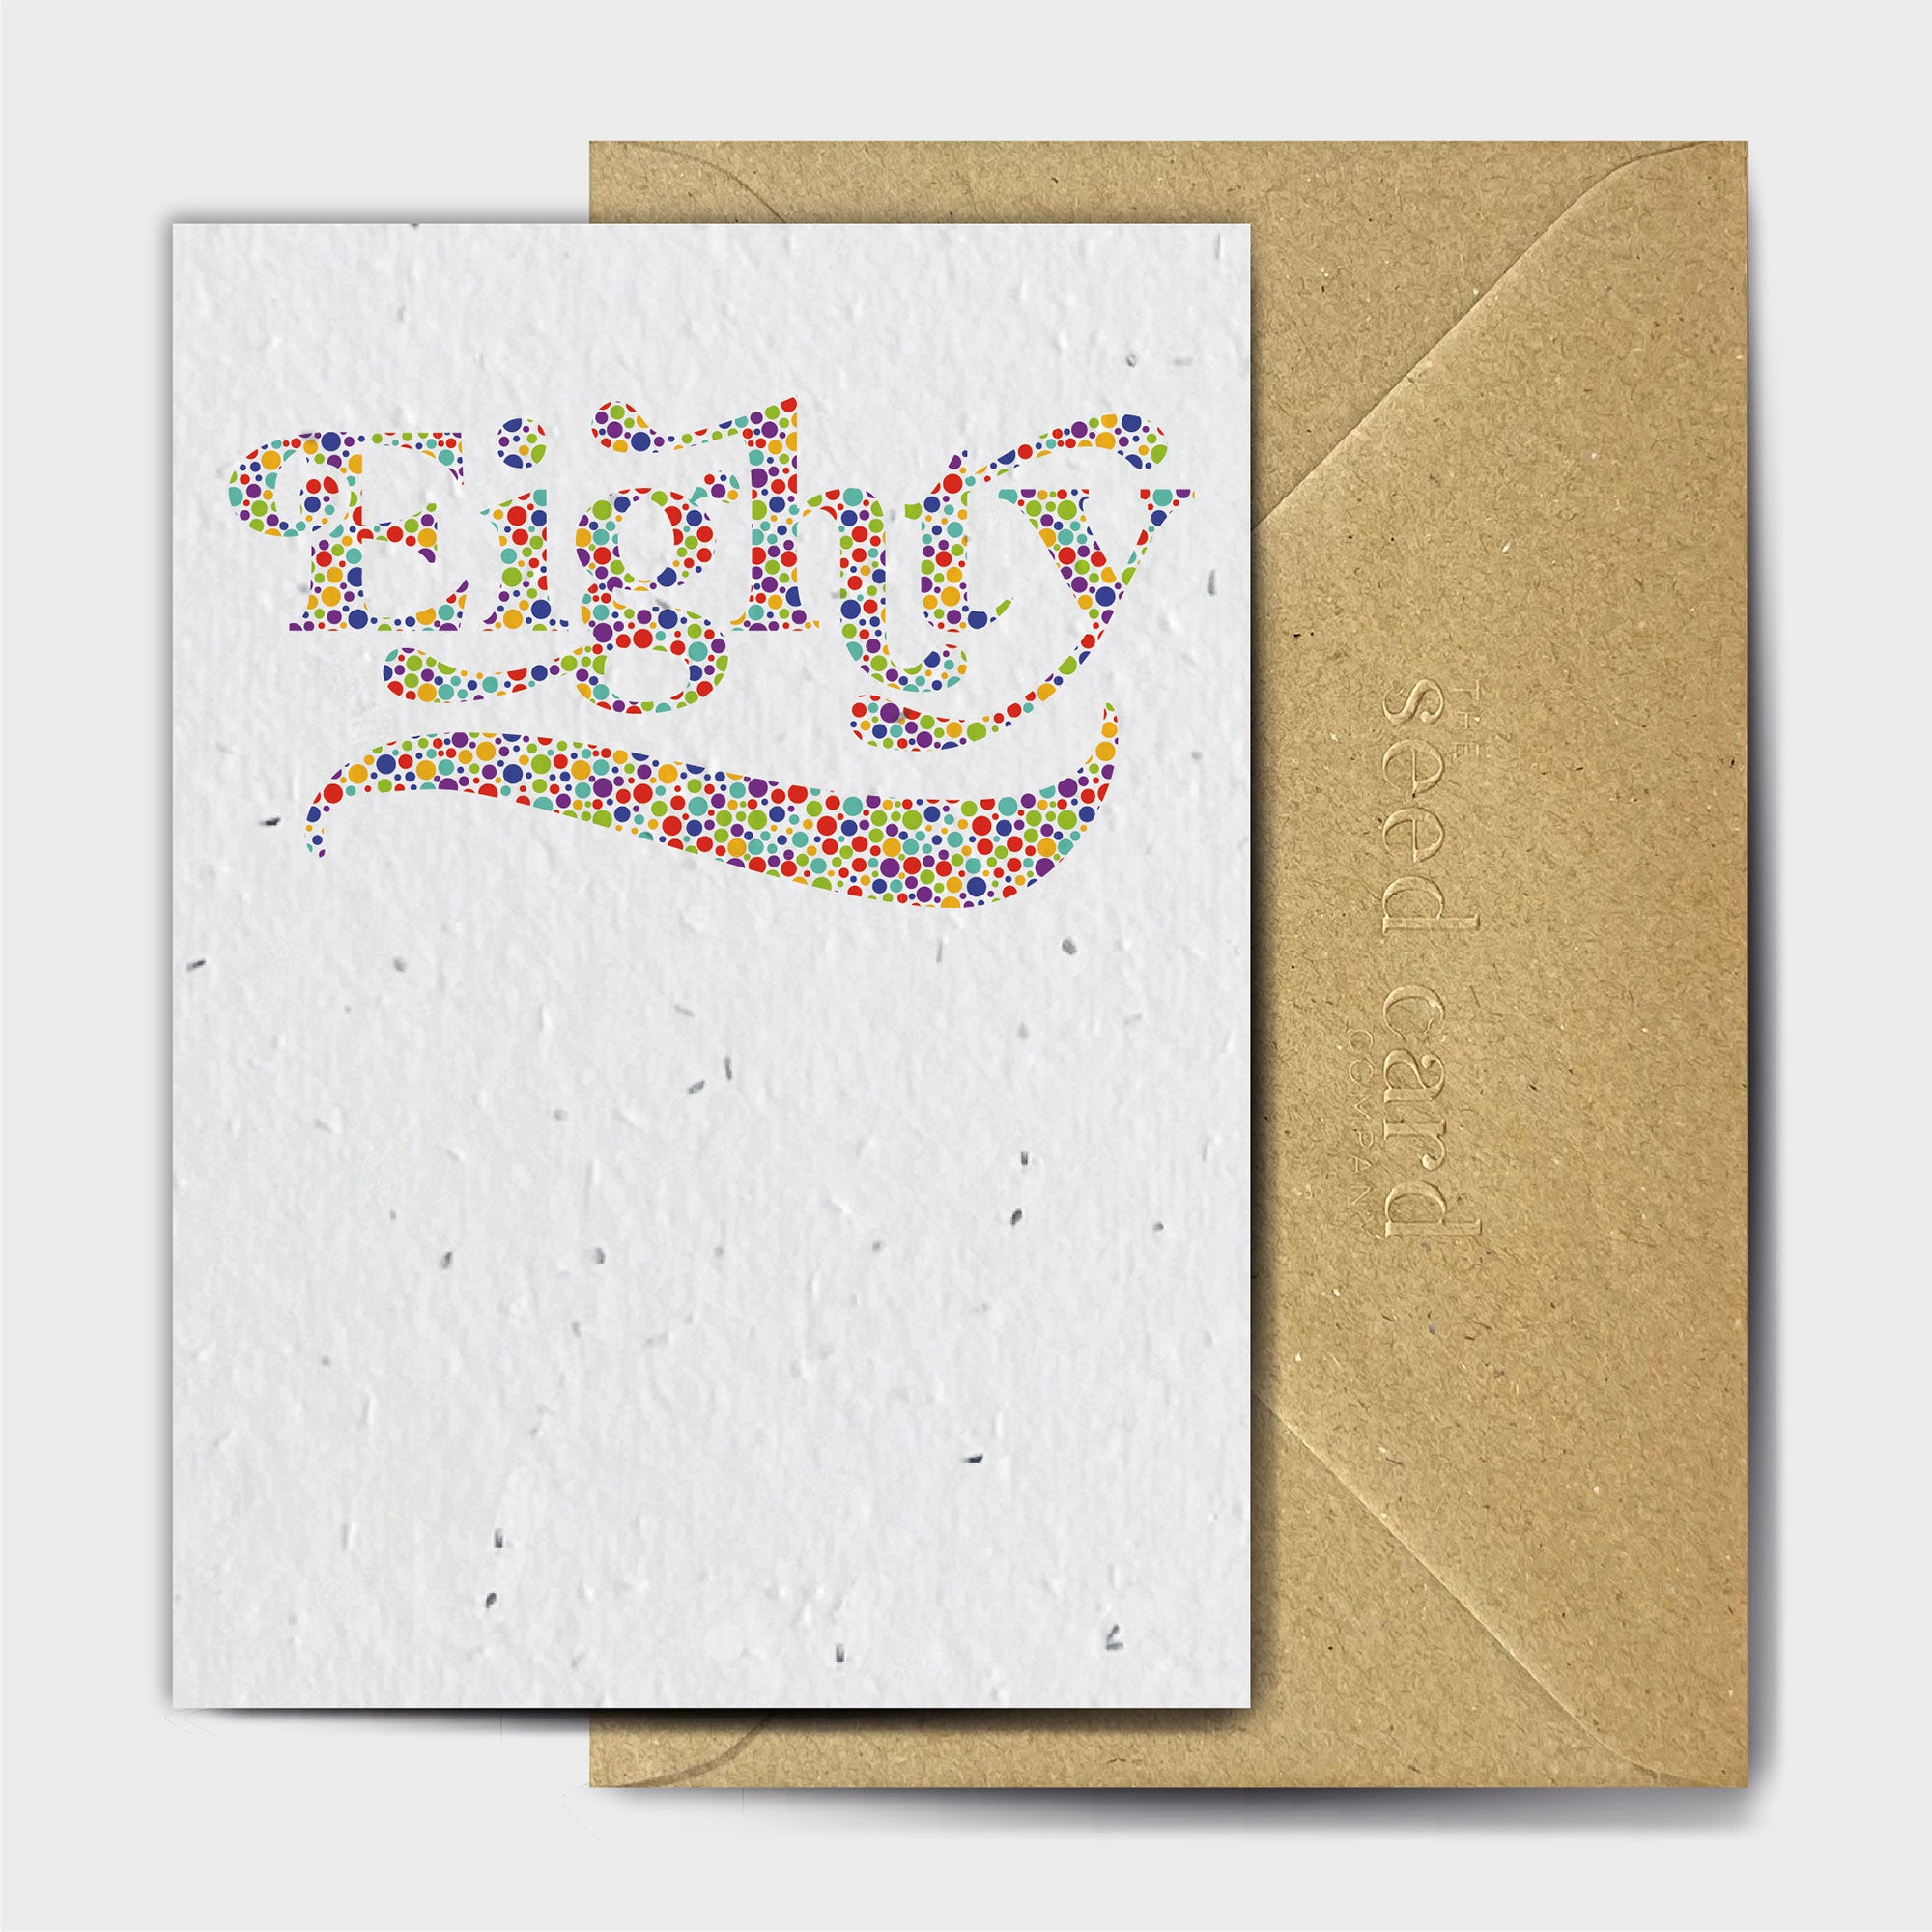 Shop online Dotty Eighty - 100% biodegradable seed-embedded cards Shop -The Seed Card Company